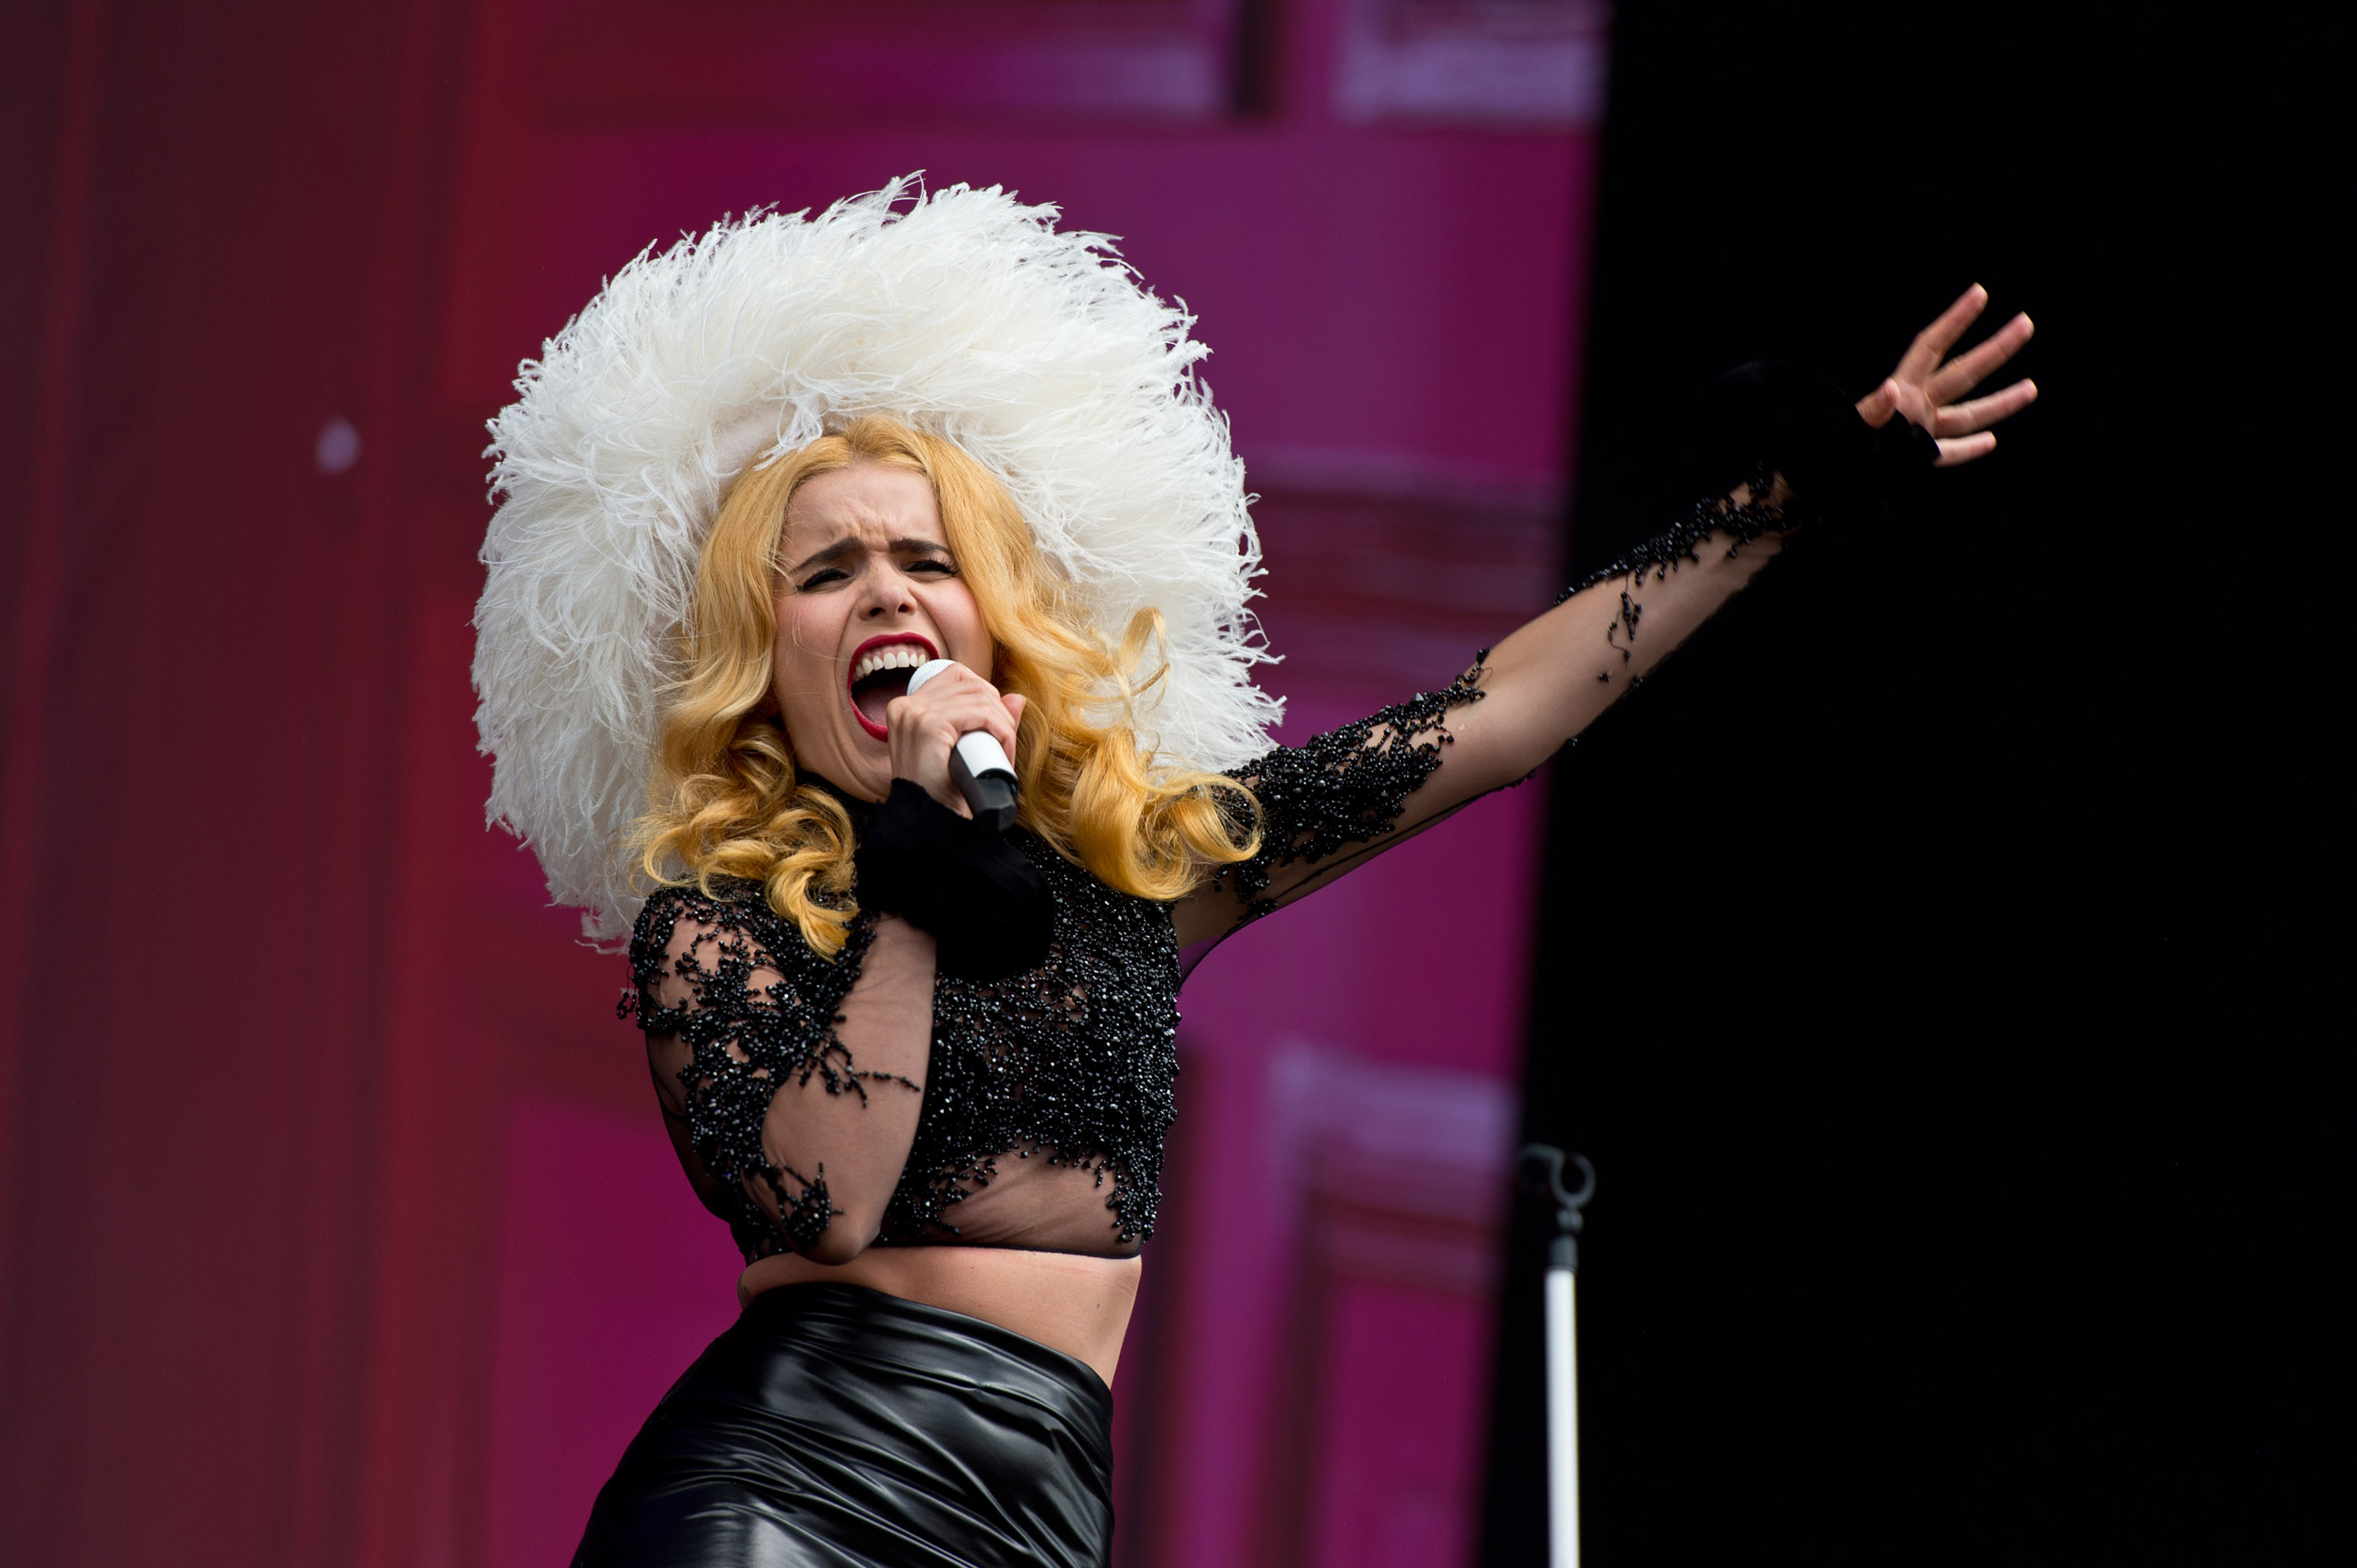 Paloma Faith on stage at Calling Festival